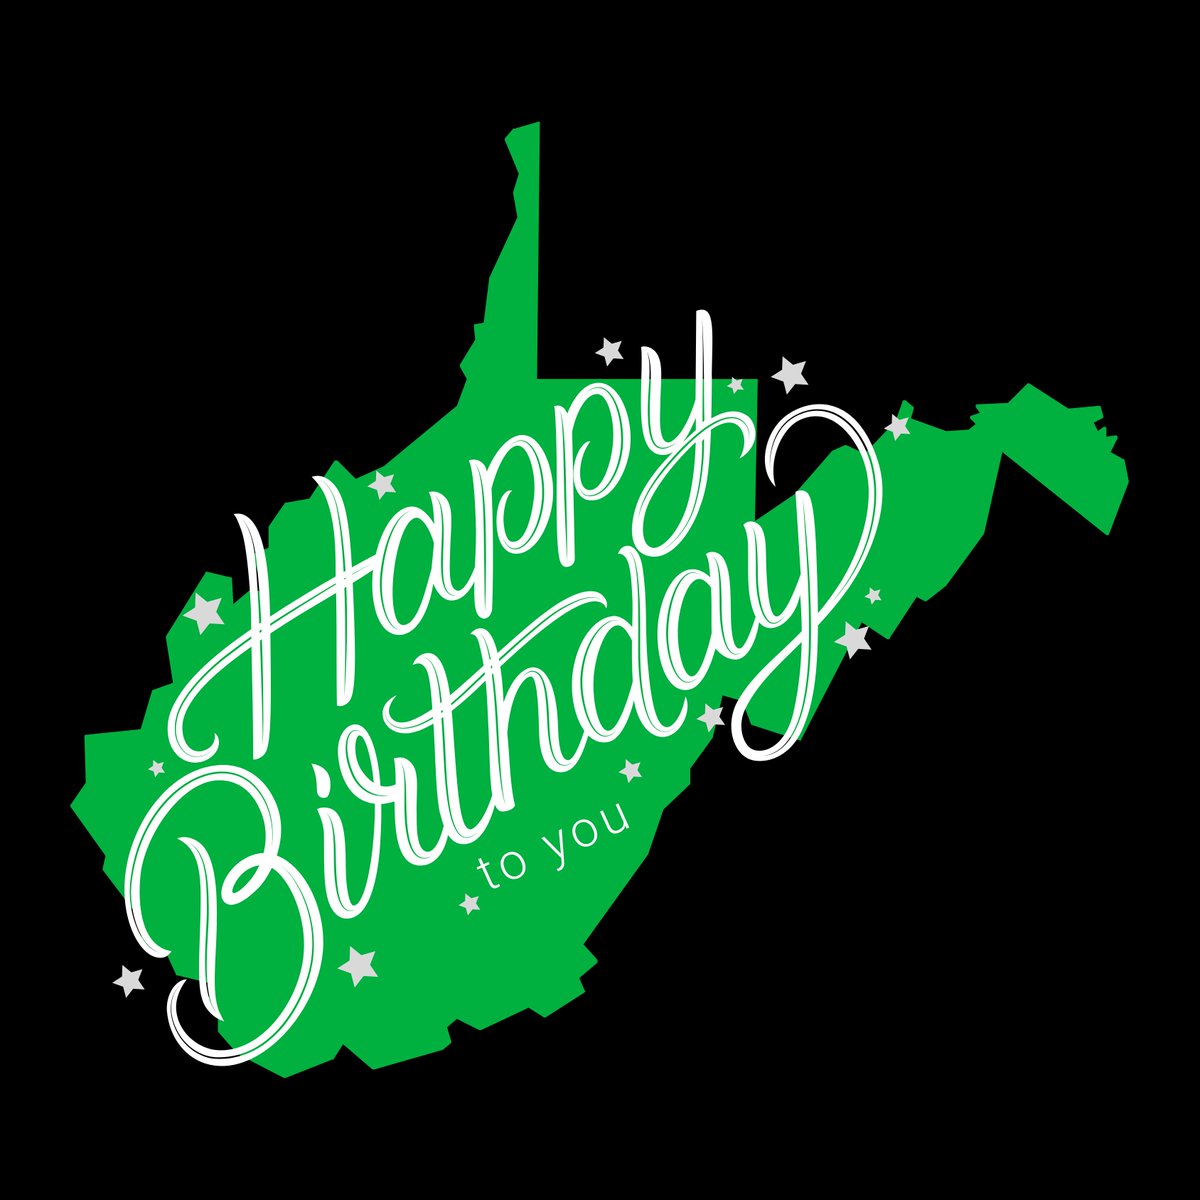 🎉 Happy 160th Birthday, West Virginia! We're honored to call this state our home, where dreams take flight and extraordinary journeys begin. 🎈💛💙 💚 #WestVirginiaDay #ProudMarshallFamily #MountainStateStrong #WV #WestVirginia